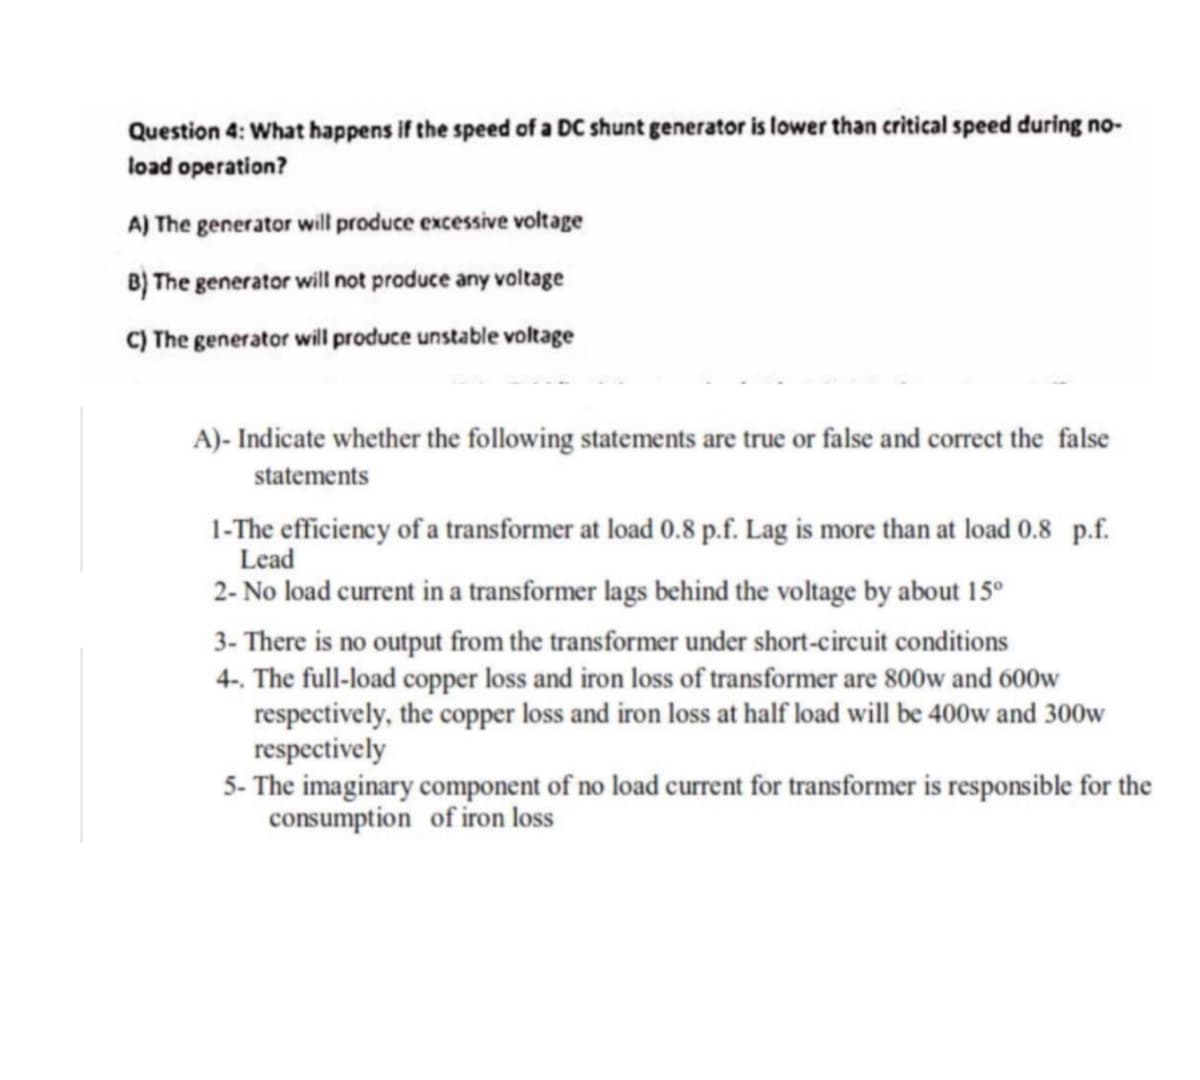 Question 4: What happens if the speed of a DC shunt generator is lower than critical speed during no-
load operation?
A) The generator will produce excessive voltage
B) The generator will not produce any voltage
C) The generator will produce unstable voltage
A)- Indicate whether the following statements are true or false and correct the false
statements
1-The efficiency of a transformer at load 0.8 p.f. Lag is more than at load 0.8 p.f.
Lead
2- No load current in a transformer lags behind the voltage by about 15°
3- There is no output from the transformer under short-circuit conditions
4-. The full-load copper loss and iron loss of transformer are 800w and 600w
respectively, the copper loss and iron loss at half load will be 400w and 300w
respectively
5- The imaginary component of no load current for transformer is responsible for the
consumption of iron loss